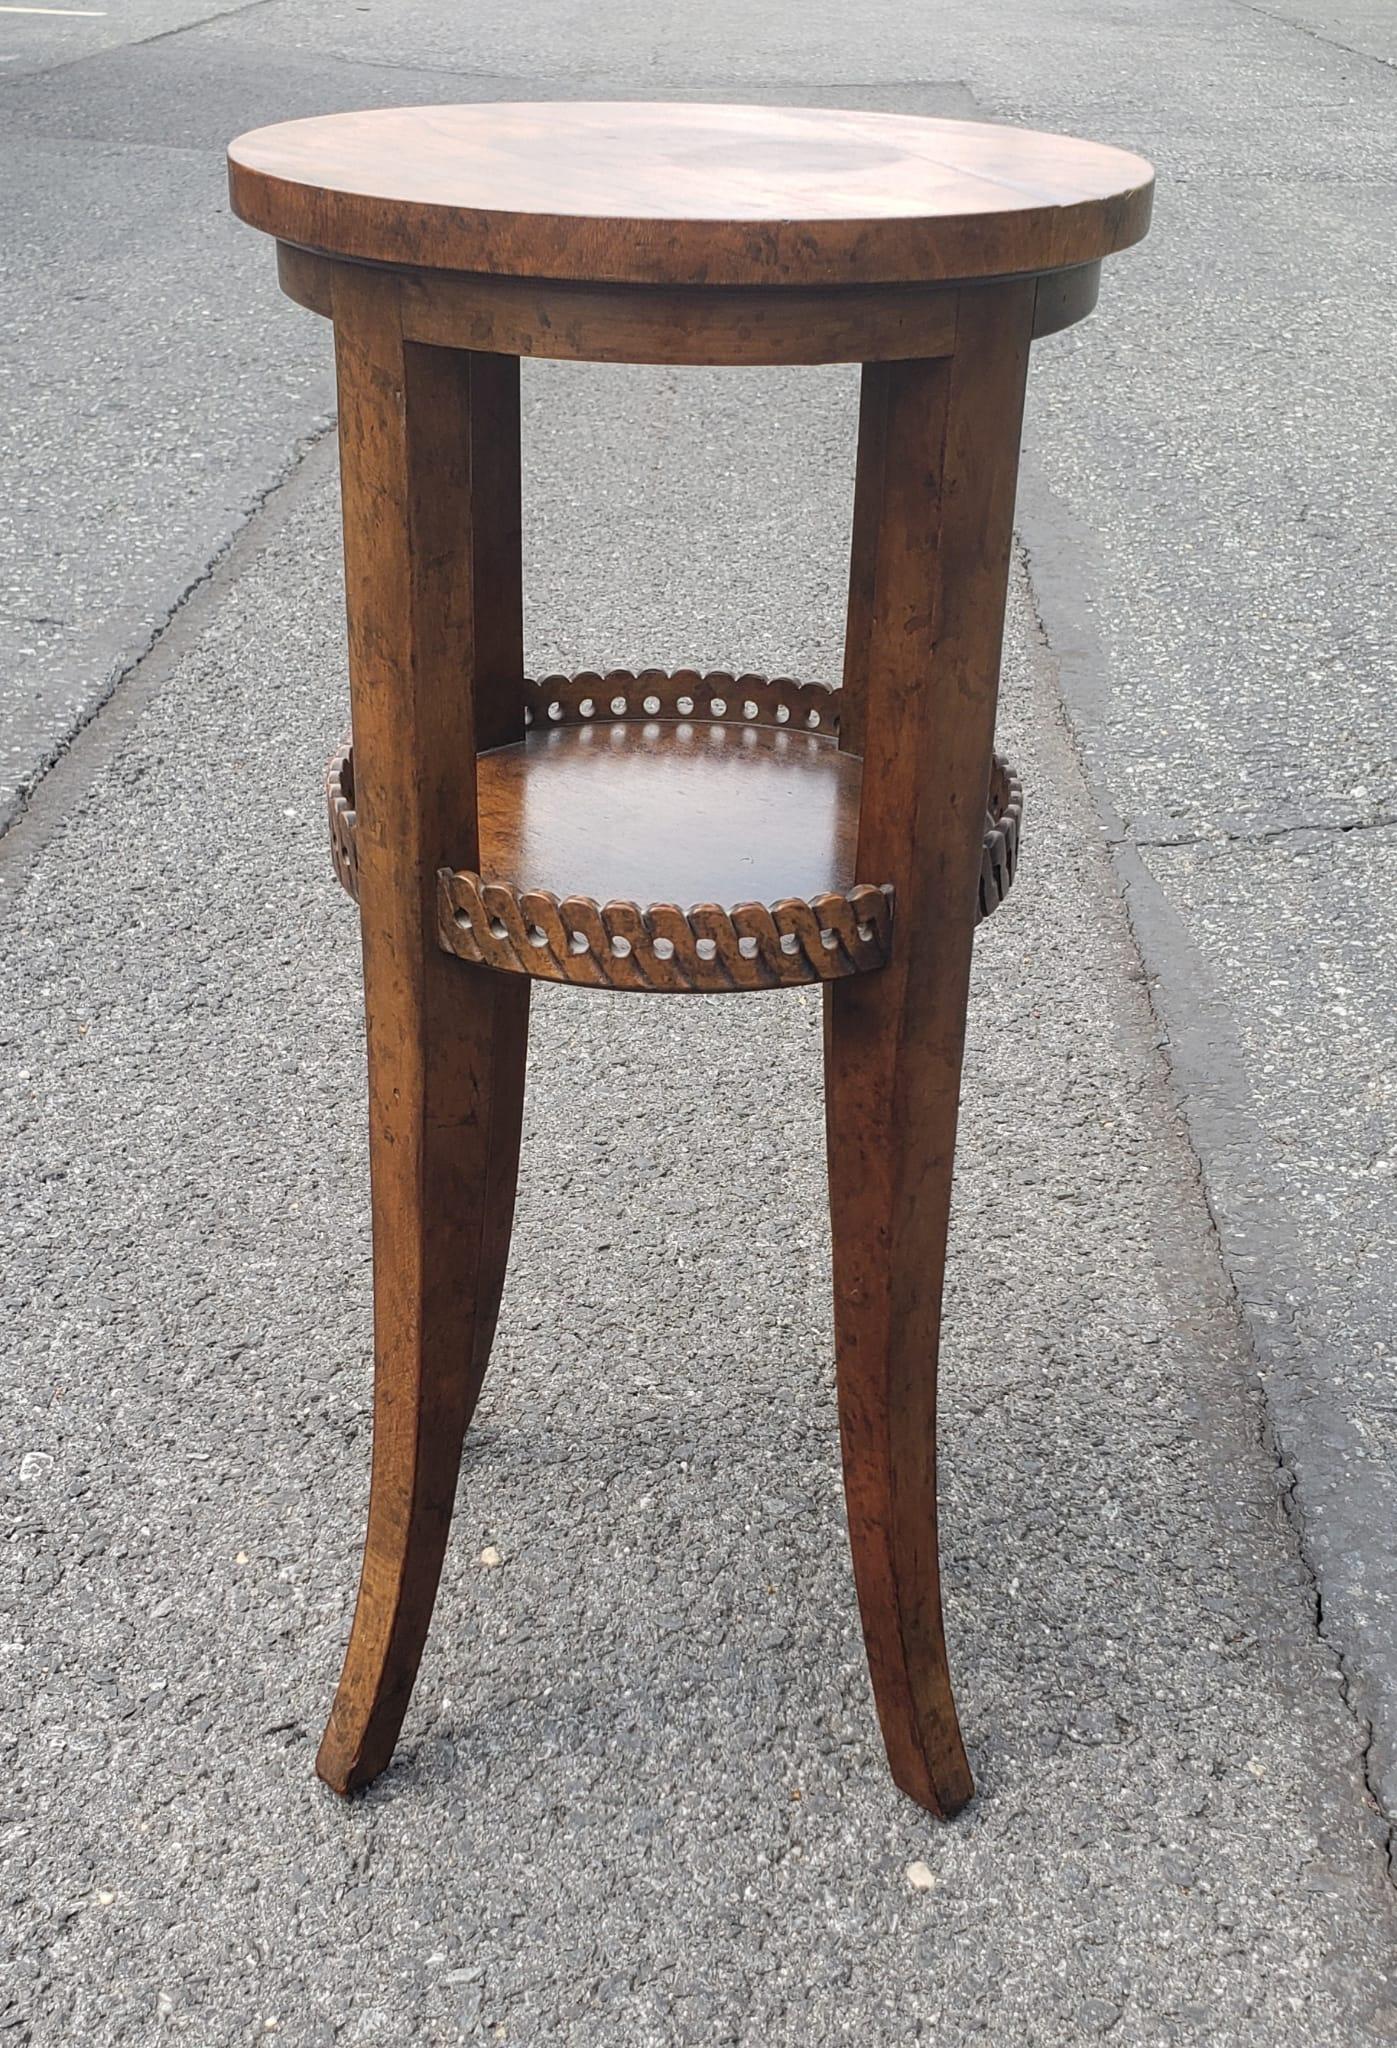 A cute Mid-Century Baker Furniture Carved and stained Walnut Candle Stand. Very sturdy.
Measures 10.5